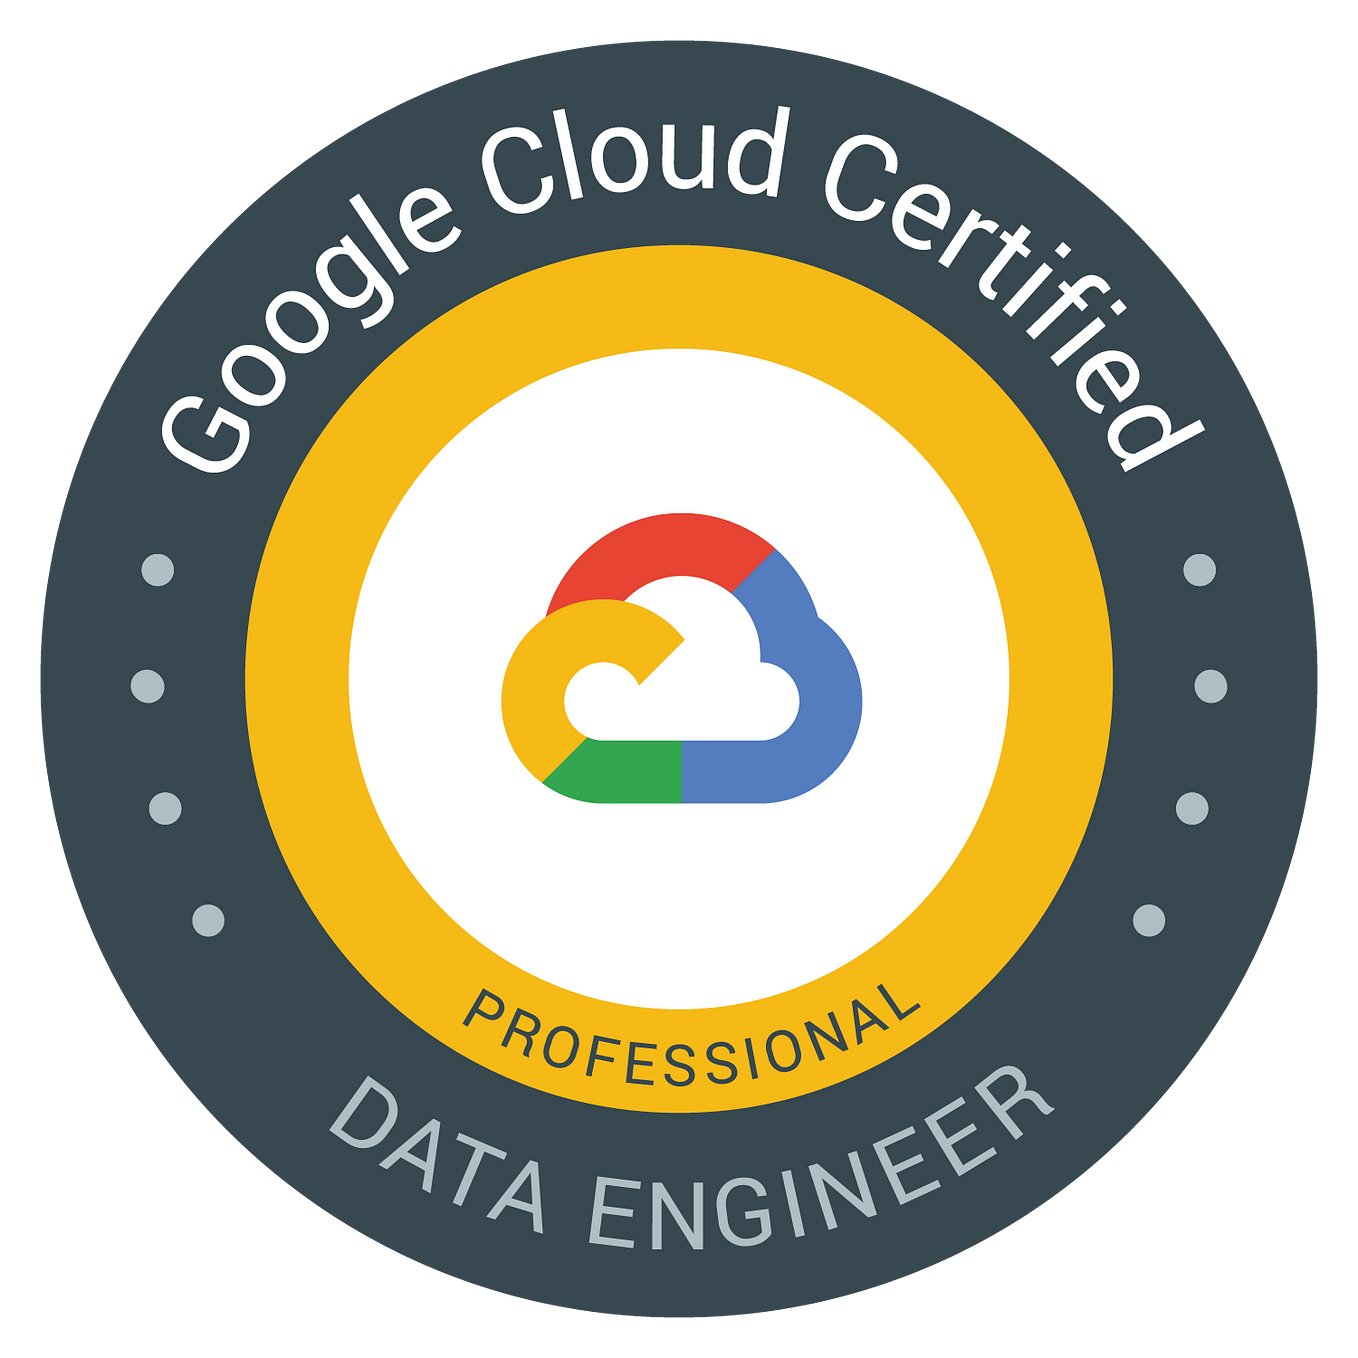 Notes from my Google Cloud Professional Data Engineer Exam